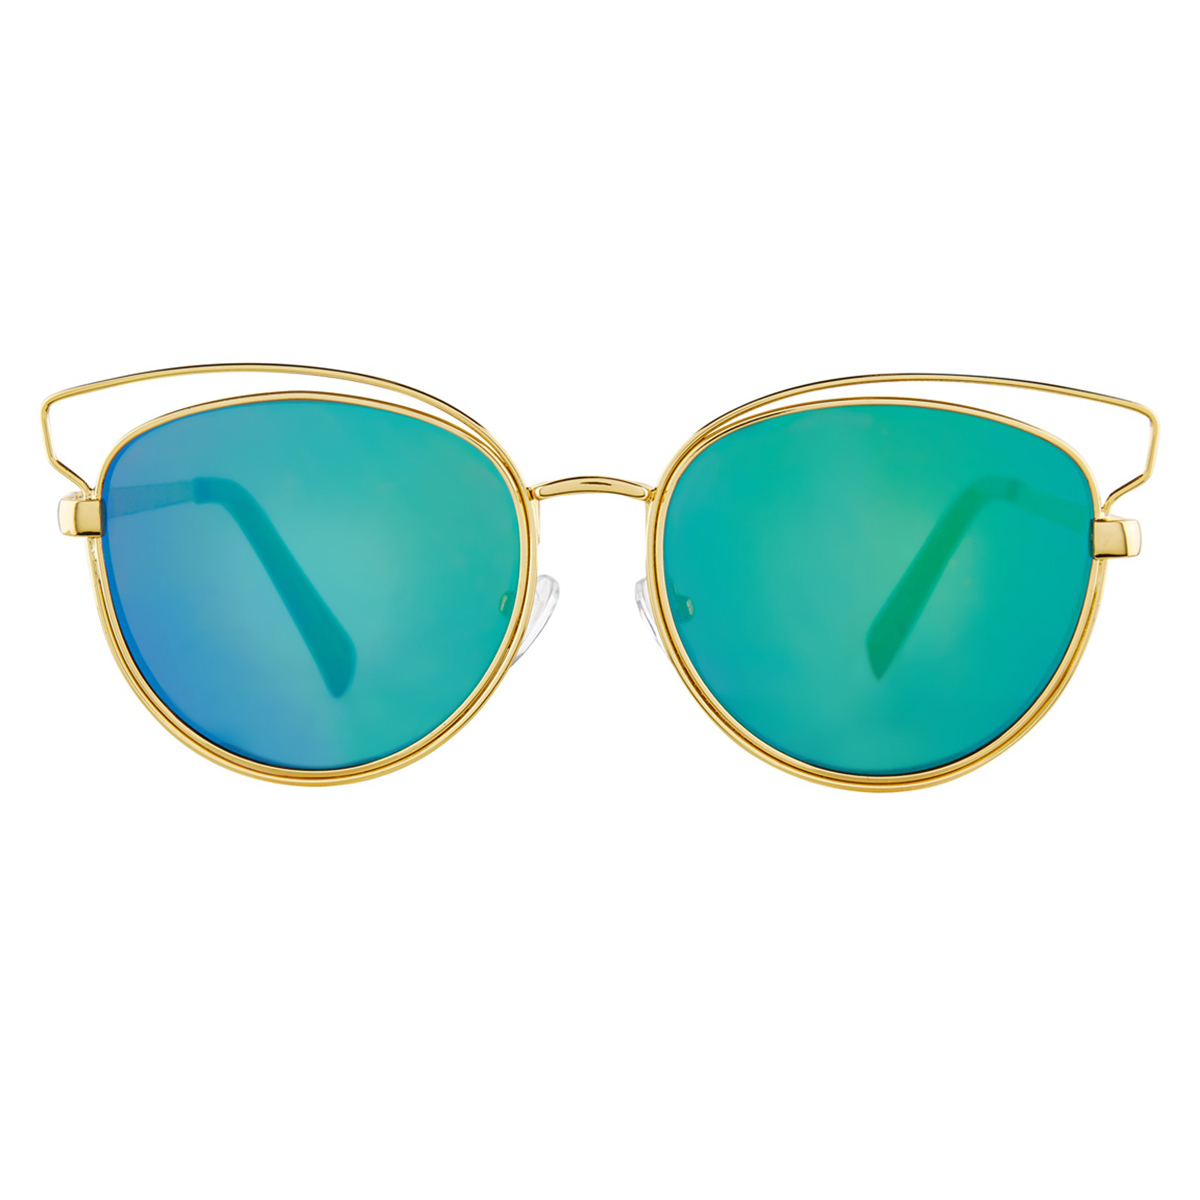 The right pair of sunglasses will complete an outfit - choose wisely with these gold frame beauties from New Look. £8.99 